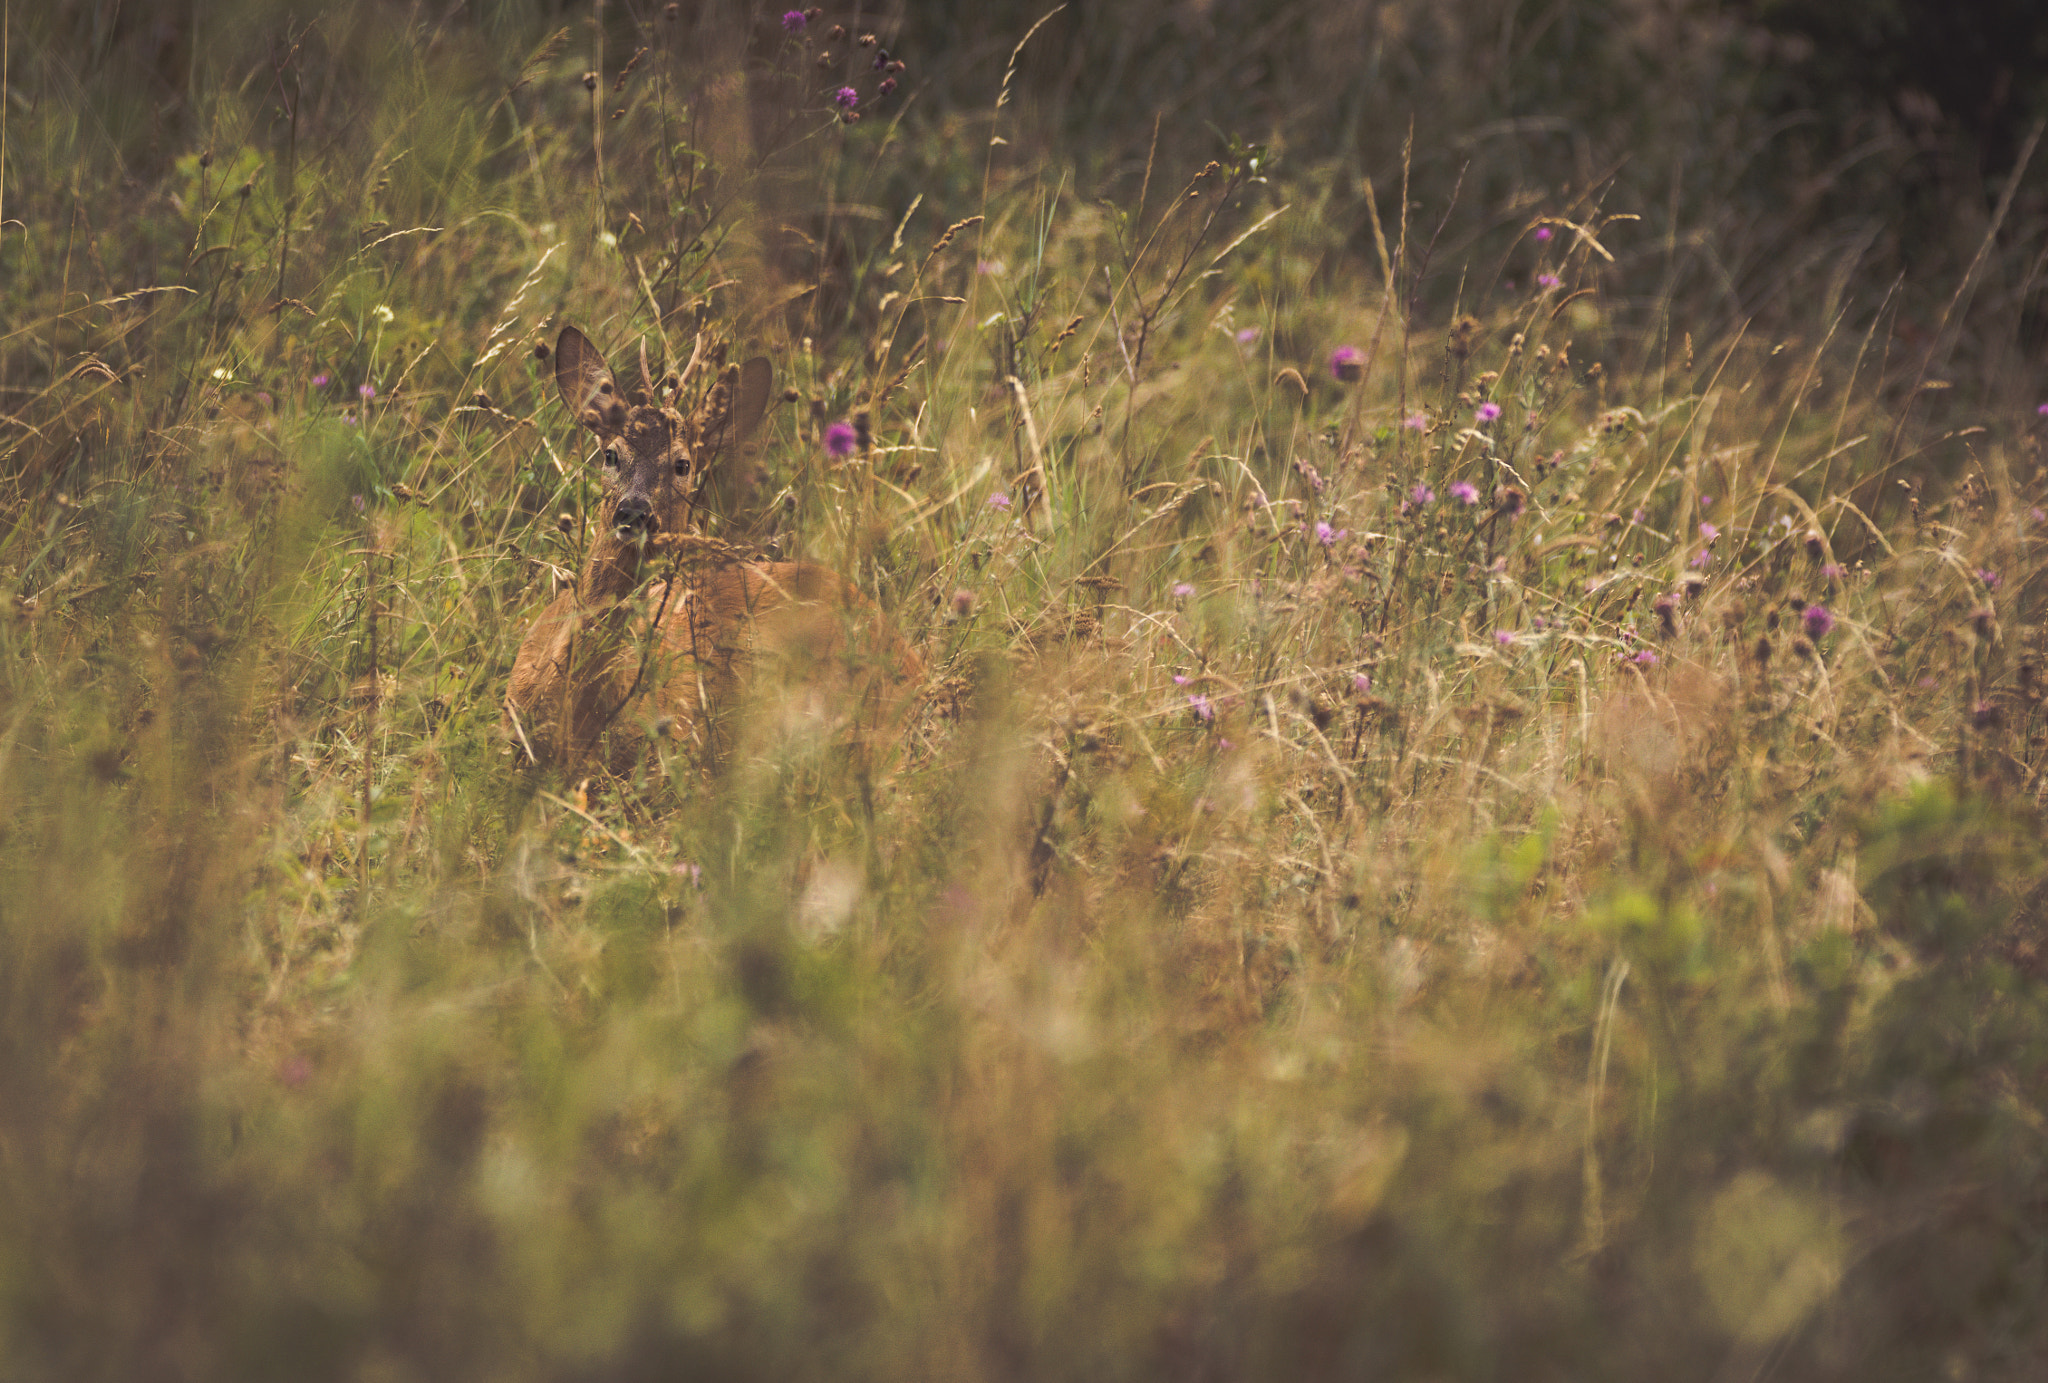 Nikon D7100 + Sigma 150-600mm F5-6.3 DG OS HSM | C sample photo. Perfectly camouflaged buck photography